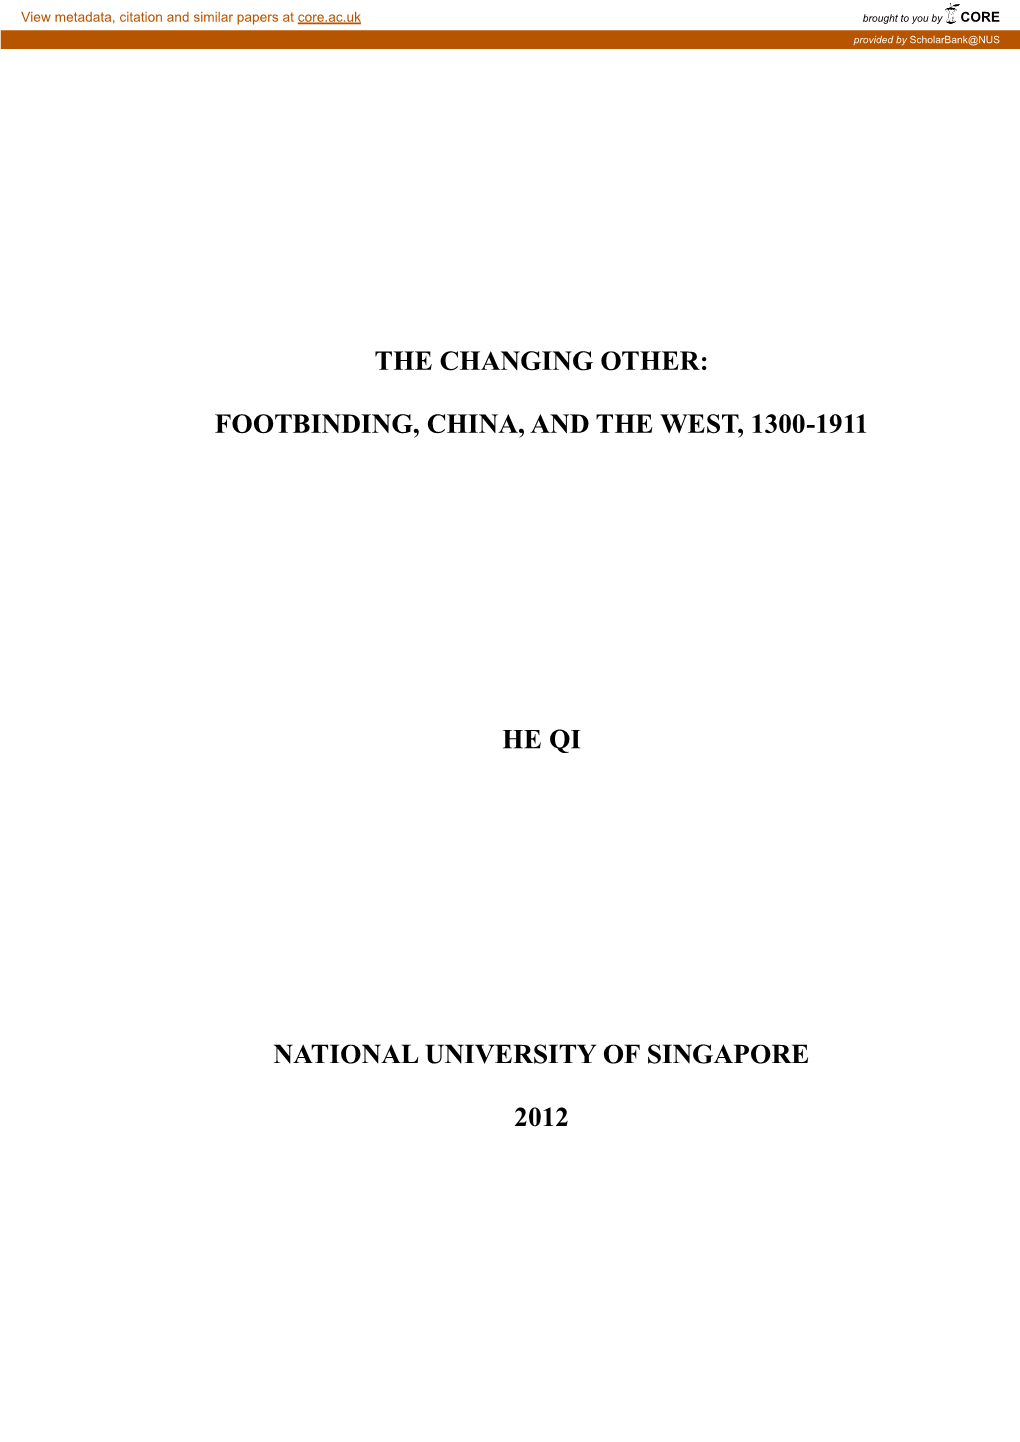 Footbinding, China, and the West, 1300-1911 He Qi